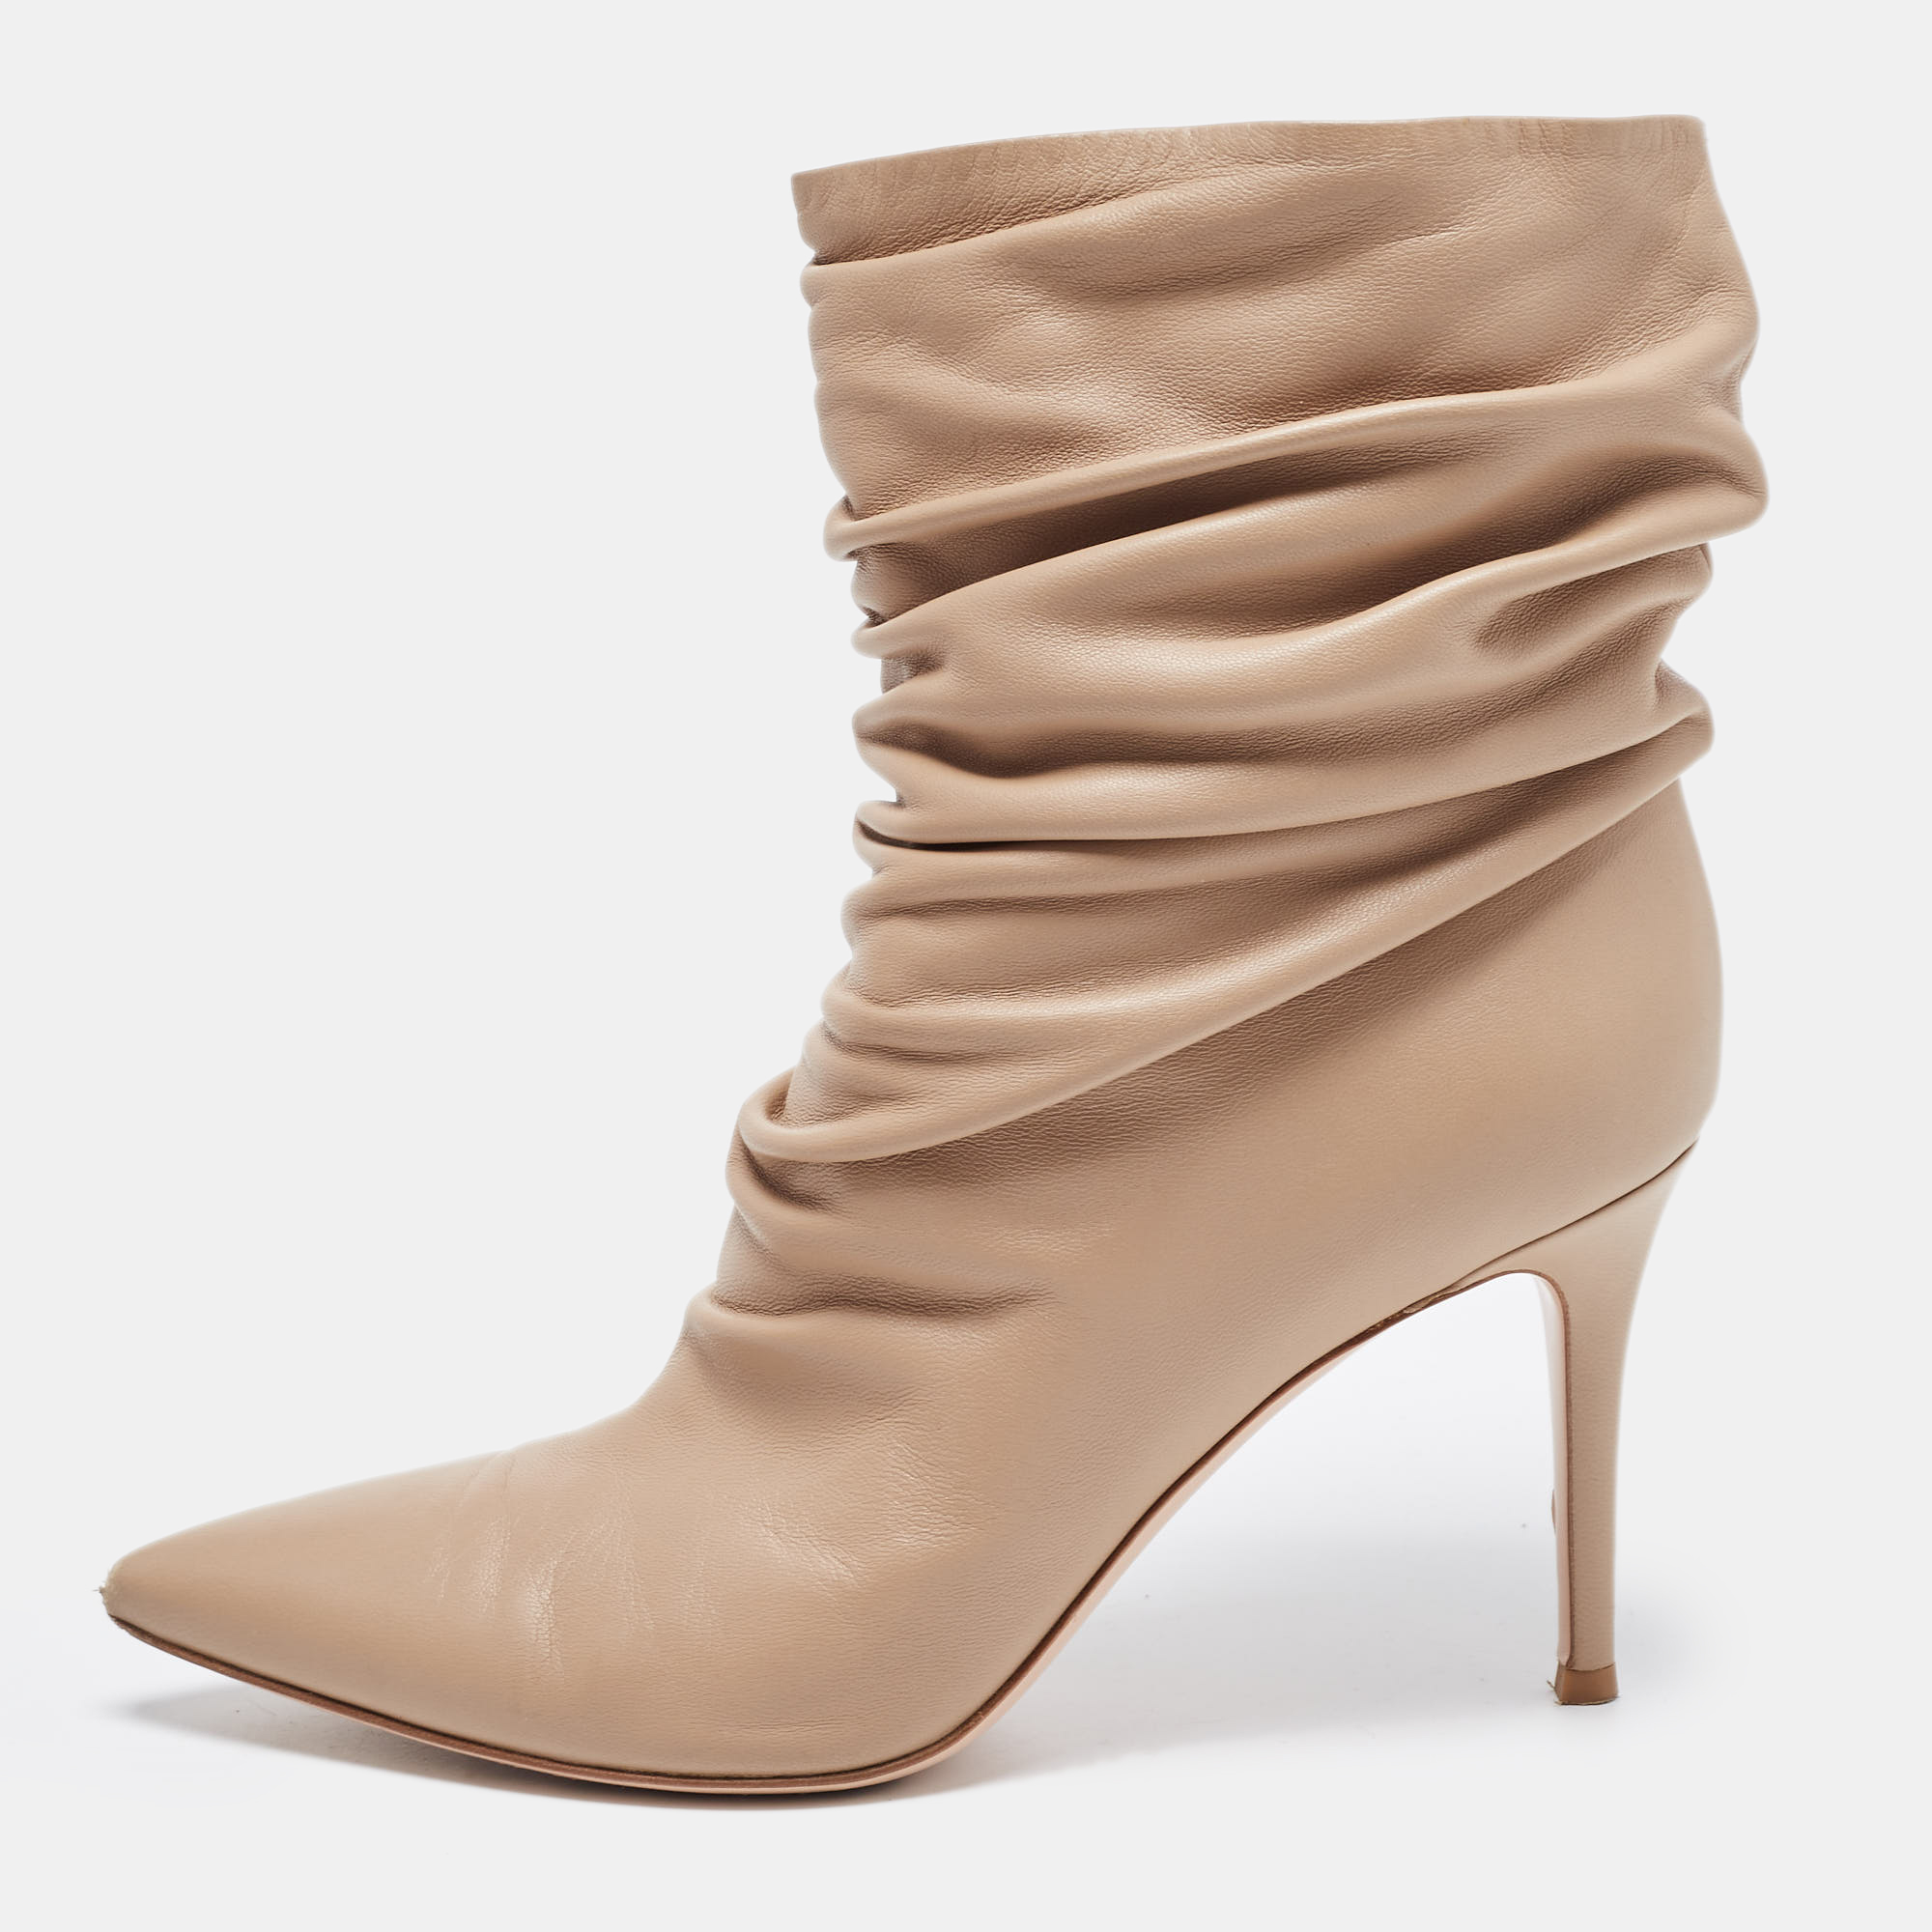 Gianvito rossi beige leather ruched ankle boots size 39